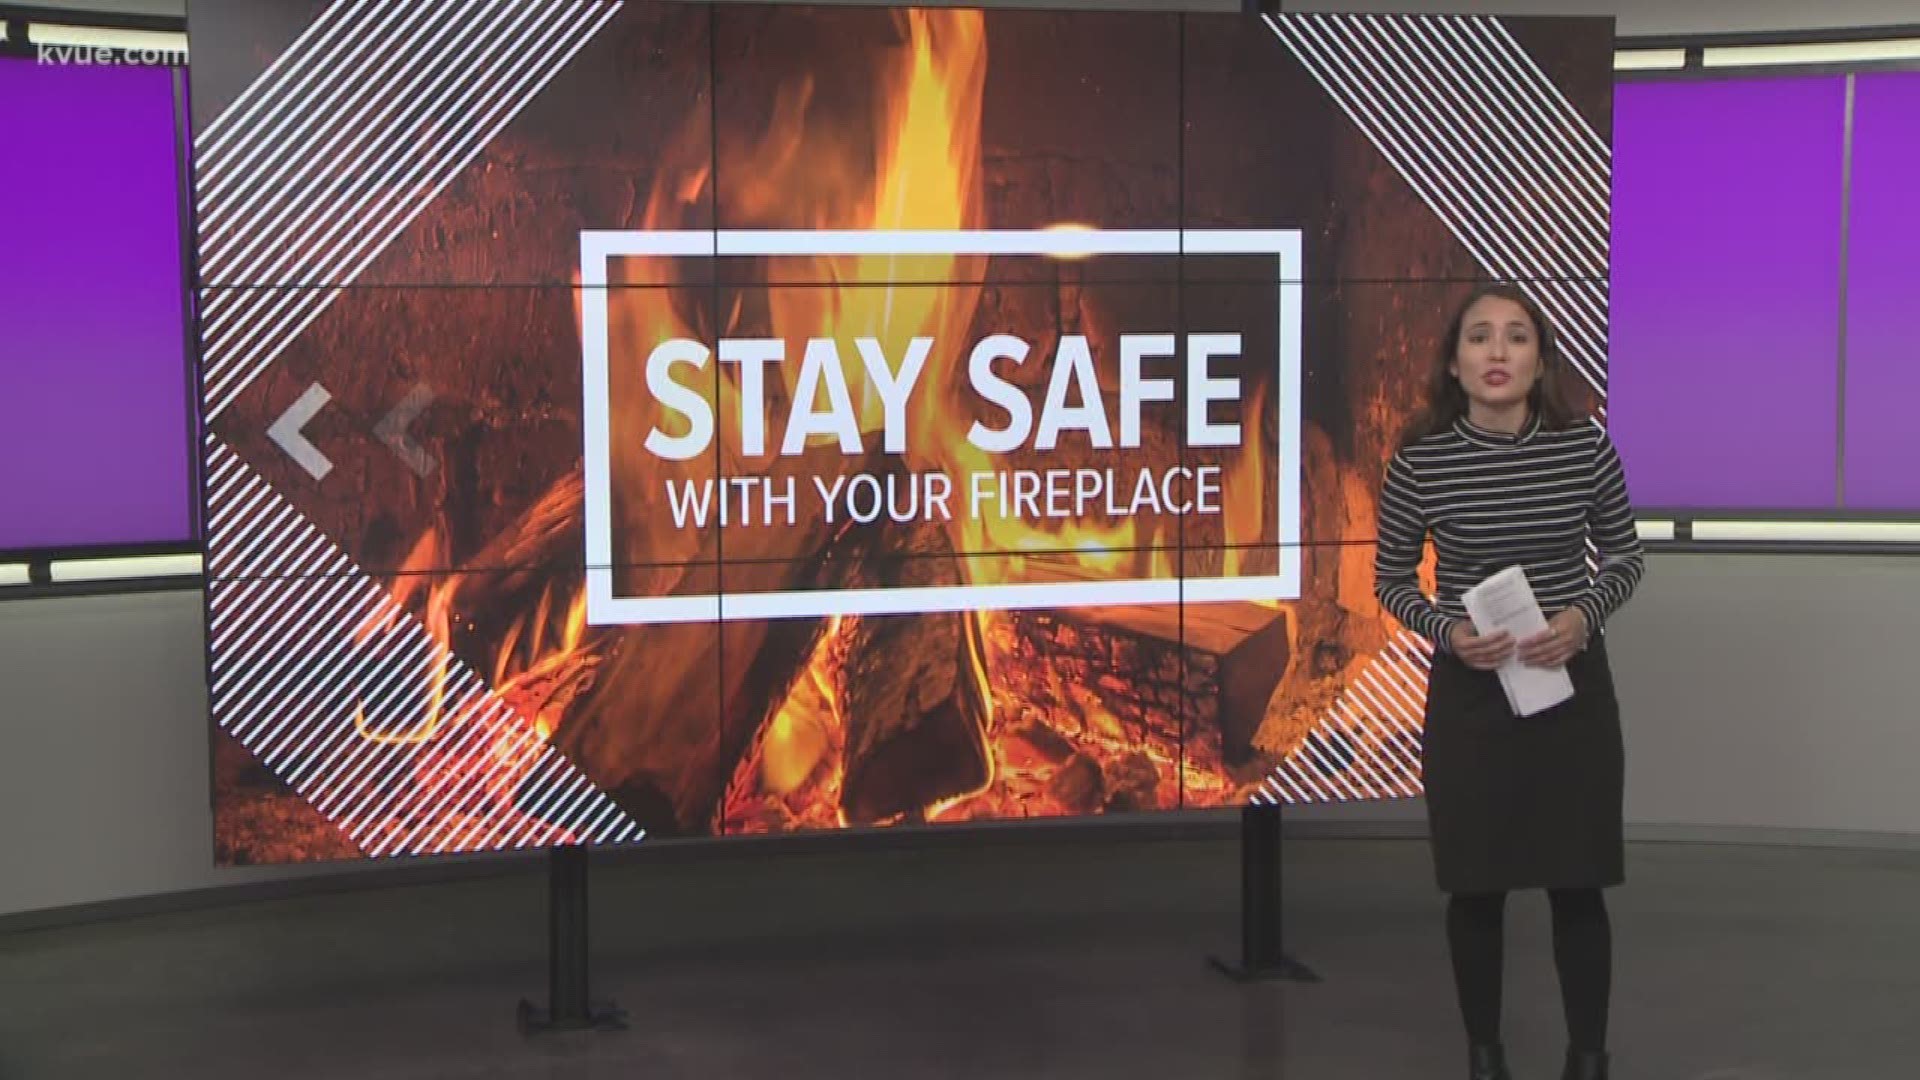 It's cold in Austin and you might want to light that fireplace to warm yourself up. Before you do, firefighters want you to know a few things.